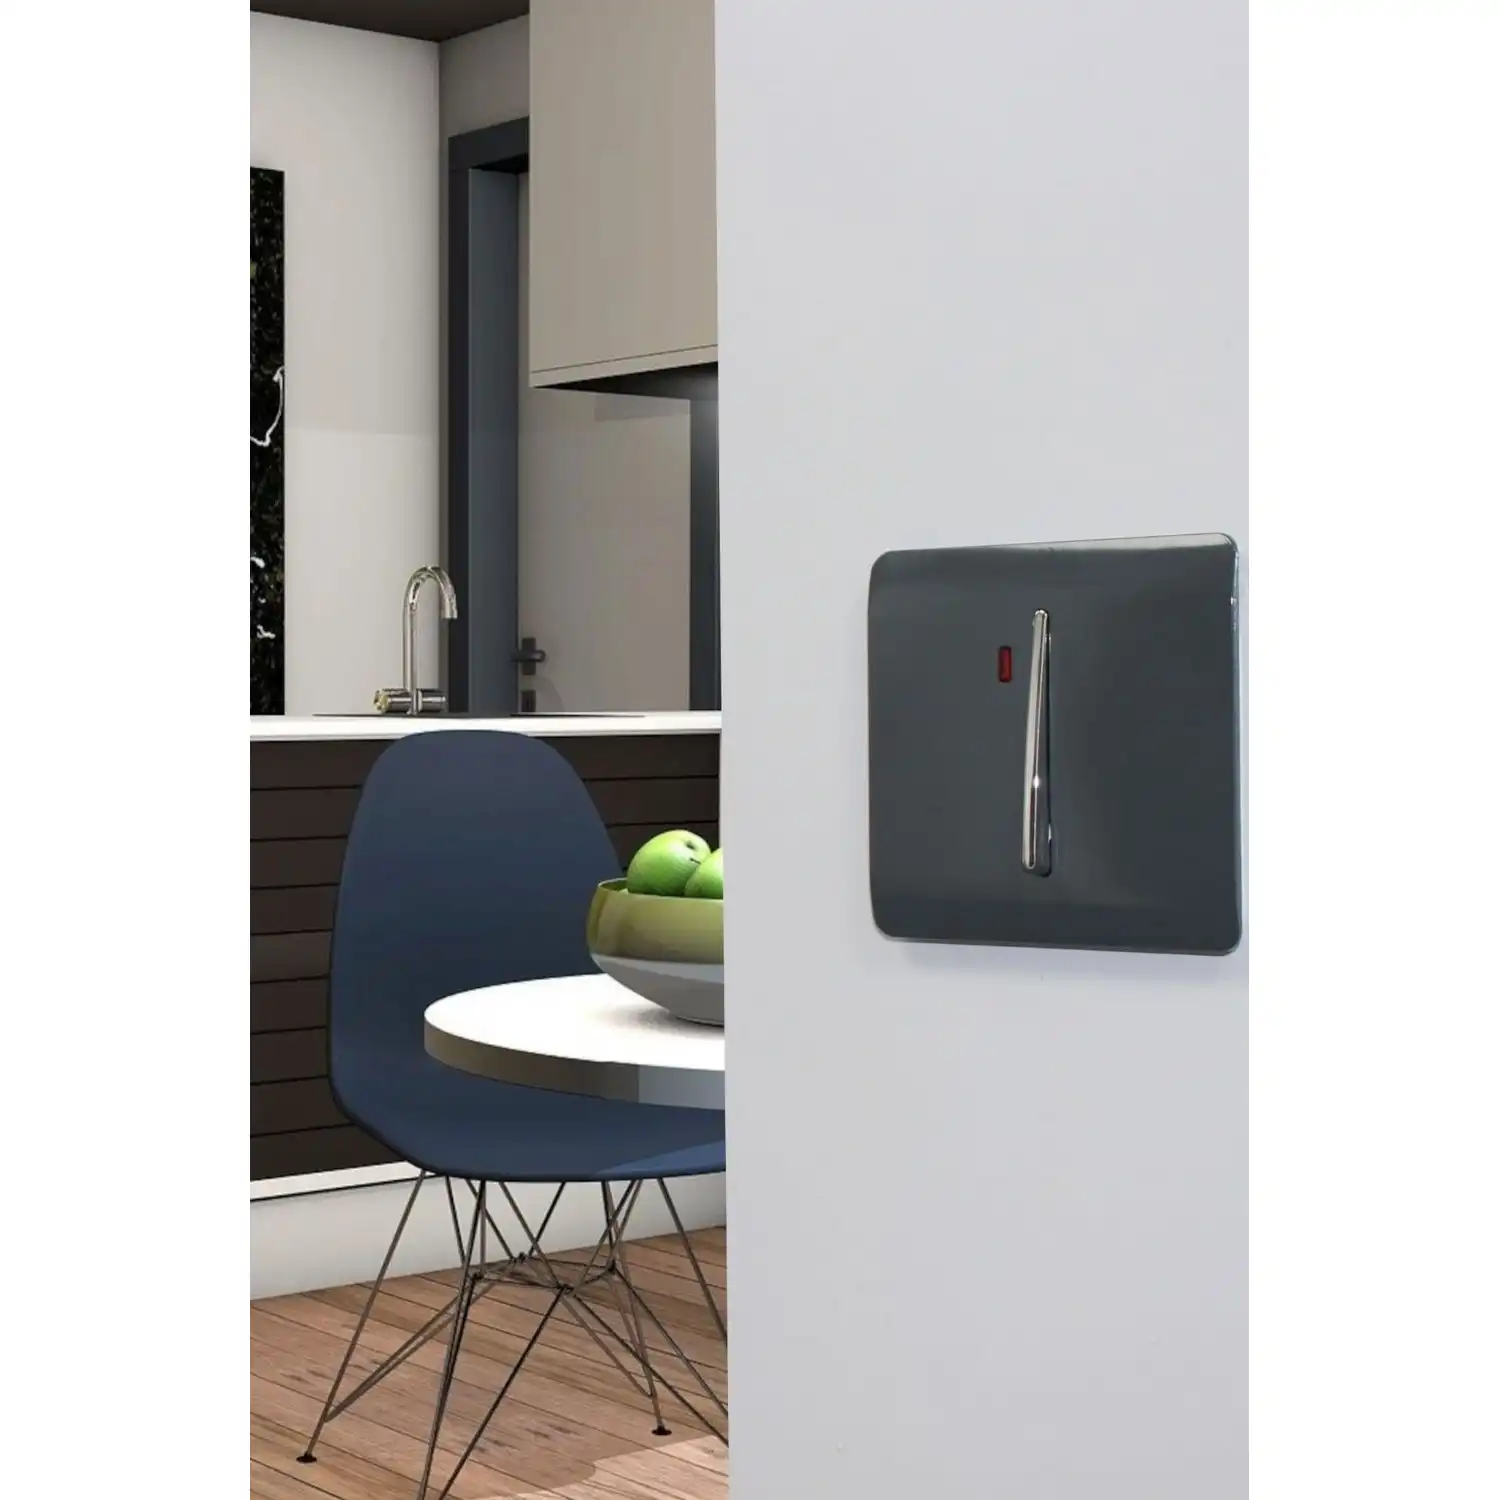 Trendi, Artistic Modern 20 Amp Neon Insert Double Pole Switch Charcoal Finish, BRITISH MADE, (25mm Back Box Required), 5yrs Warranty